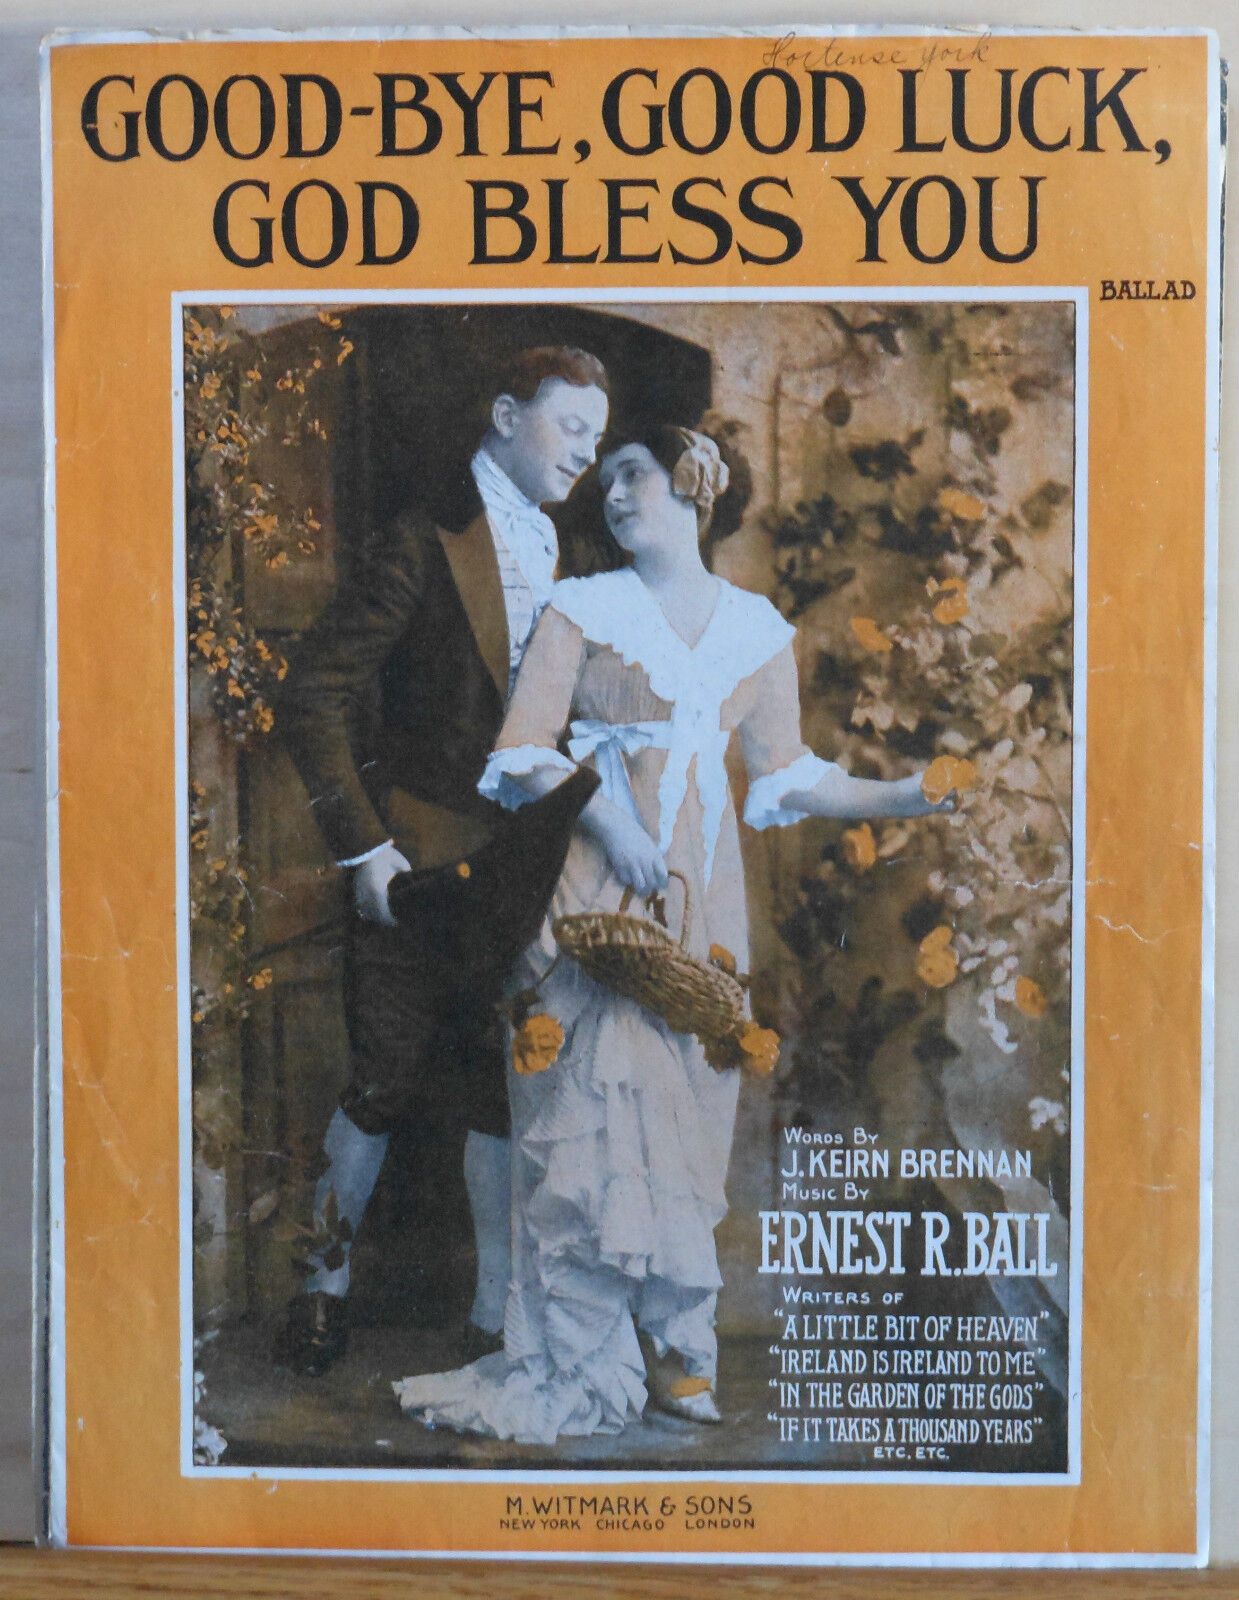 Good-bye, Good Luck, God Bless You - ballad, 1916 large sheet music, photo cover